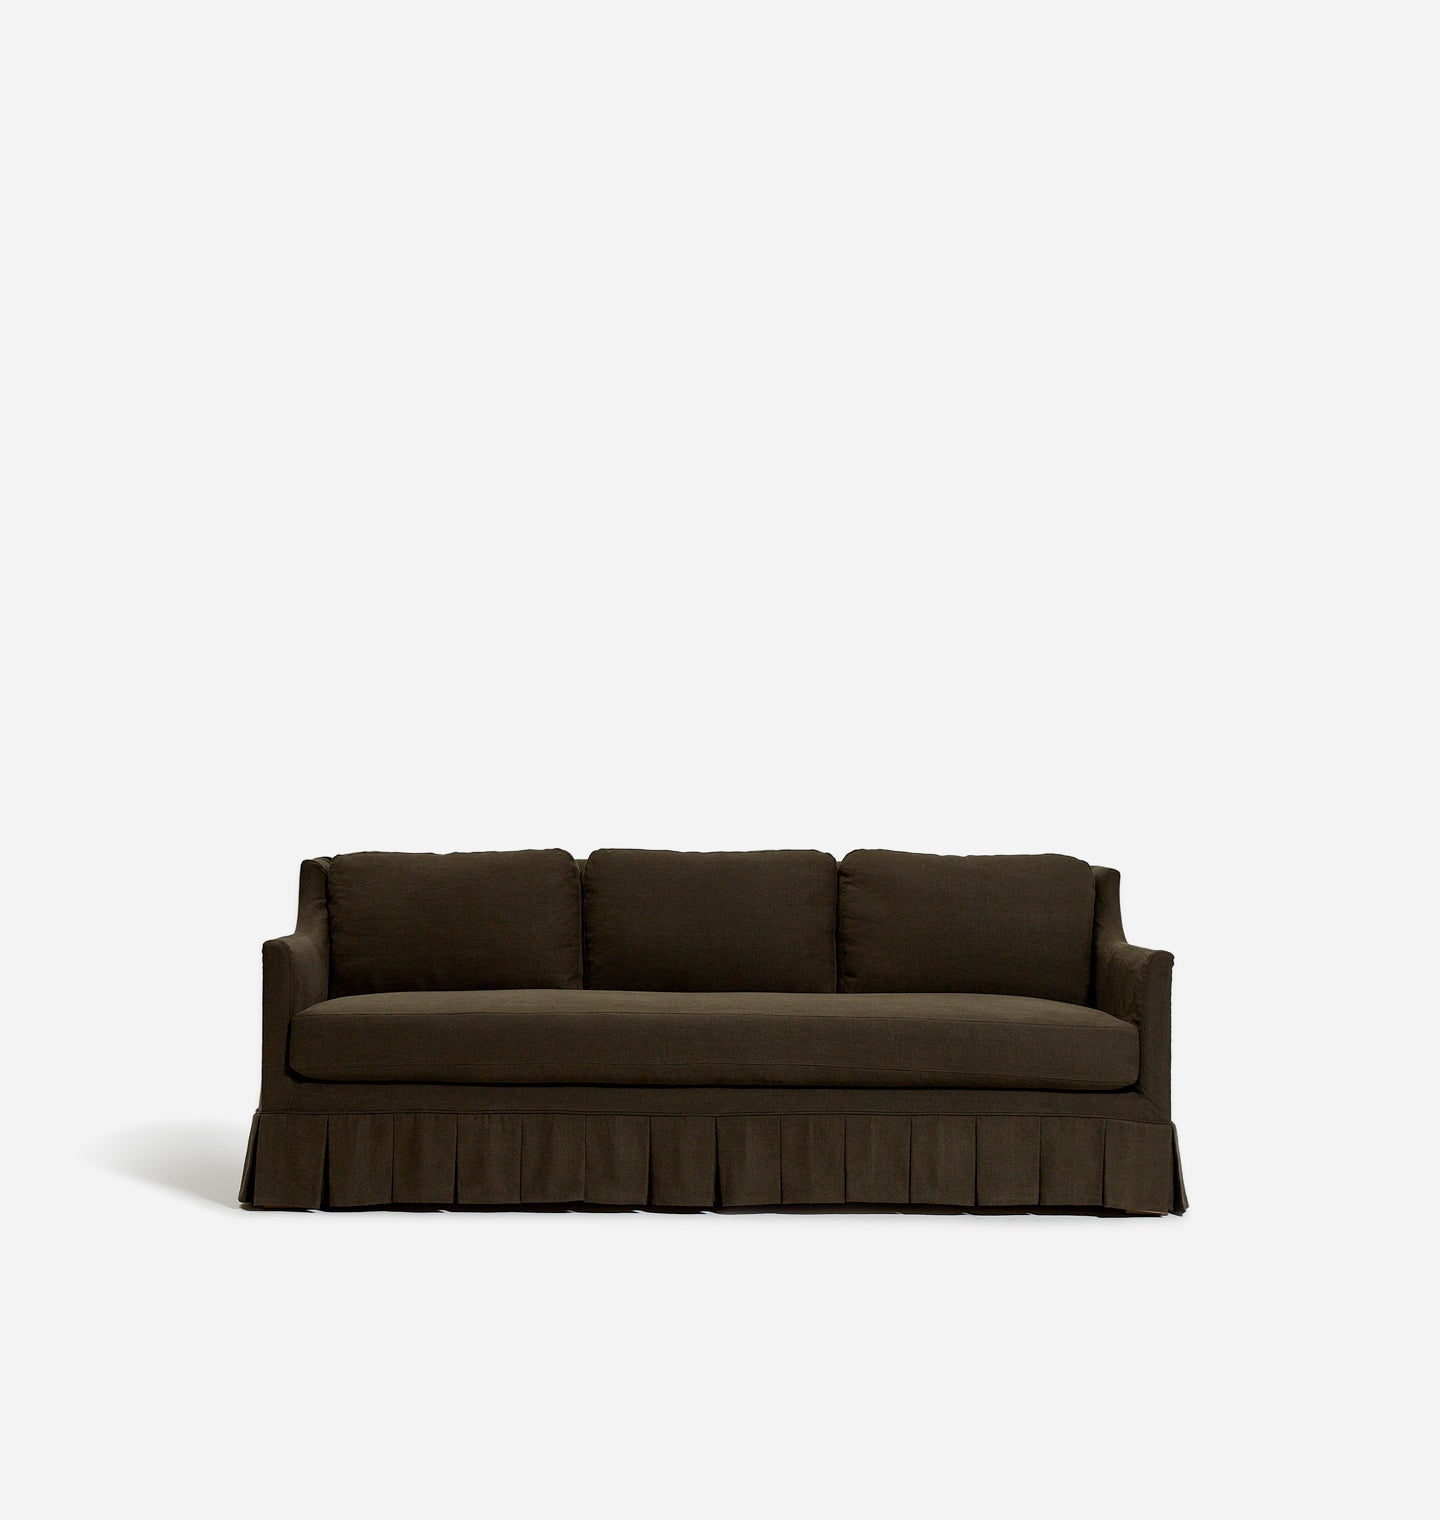 Best Slipcovered Sofas: 10 Stylish Options for Any Budget | TIME Stamped